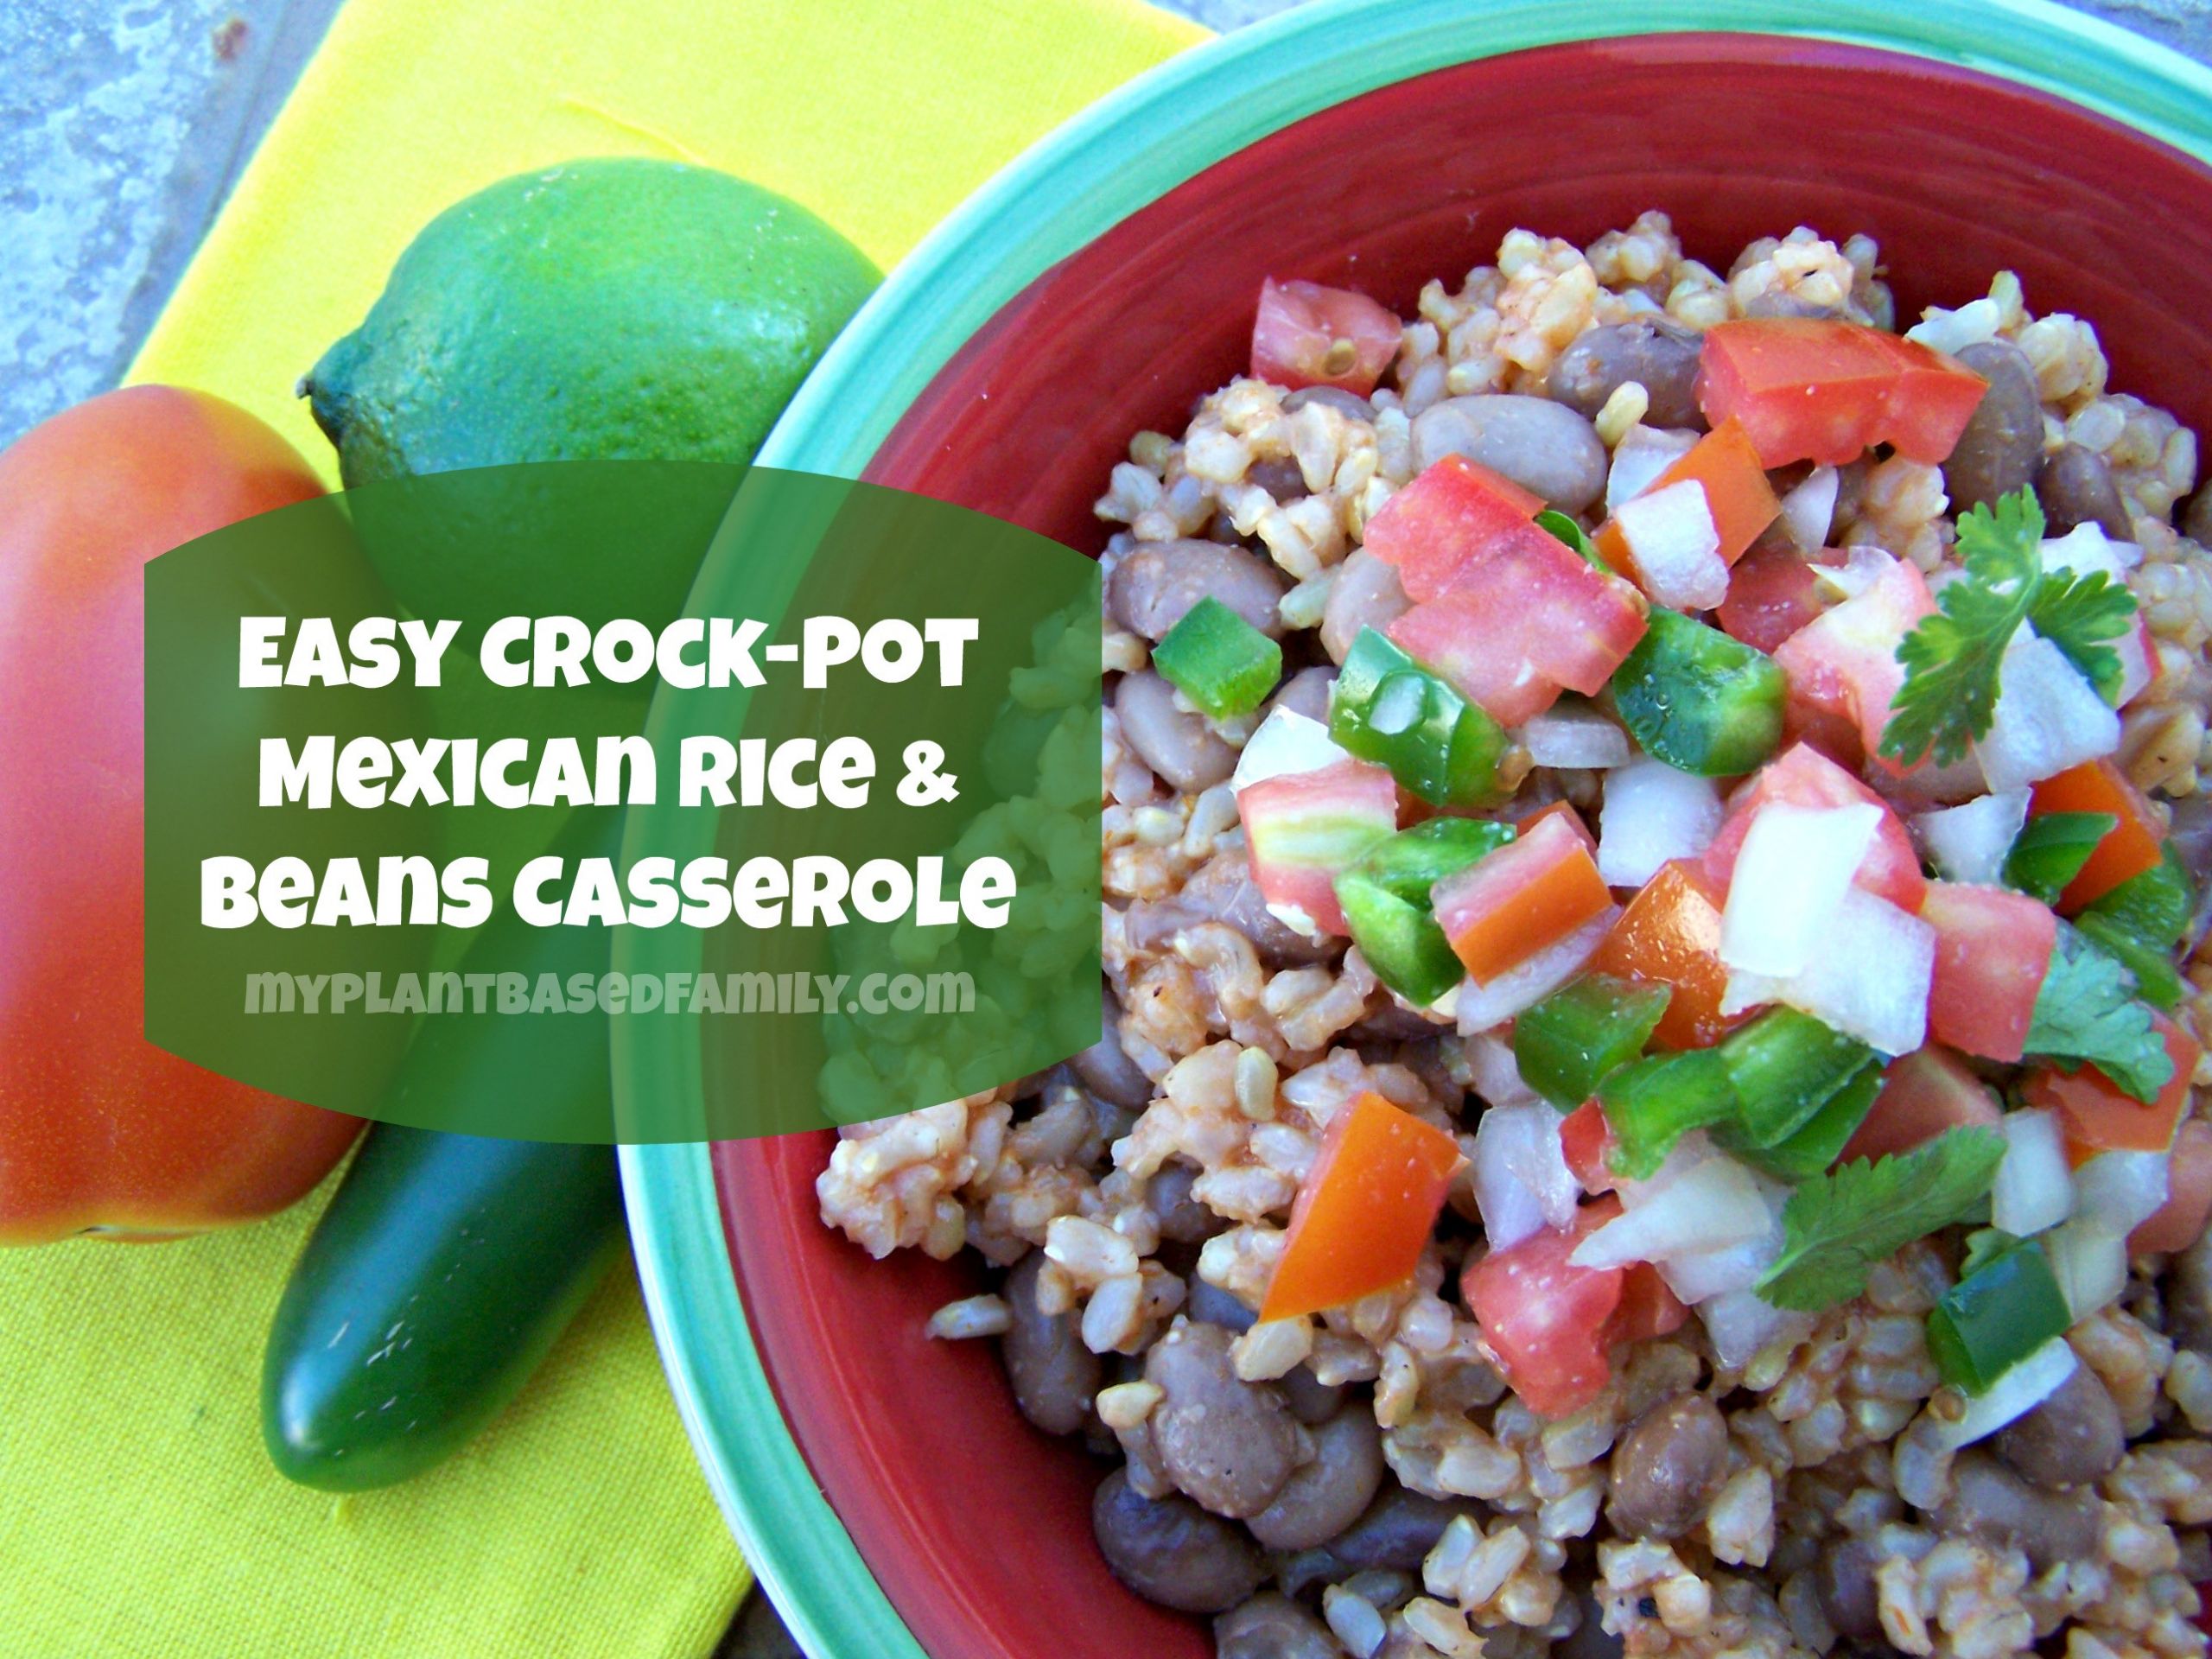 Crockpot Plant Based Recipes
 The Easy Mexican Casserole Just Got Easier My Plant